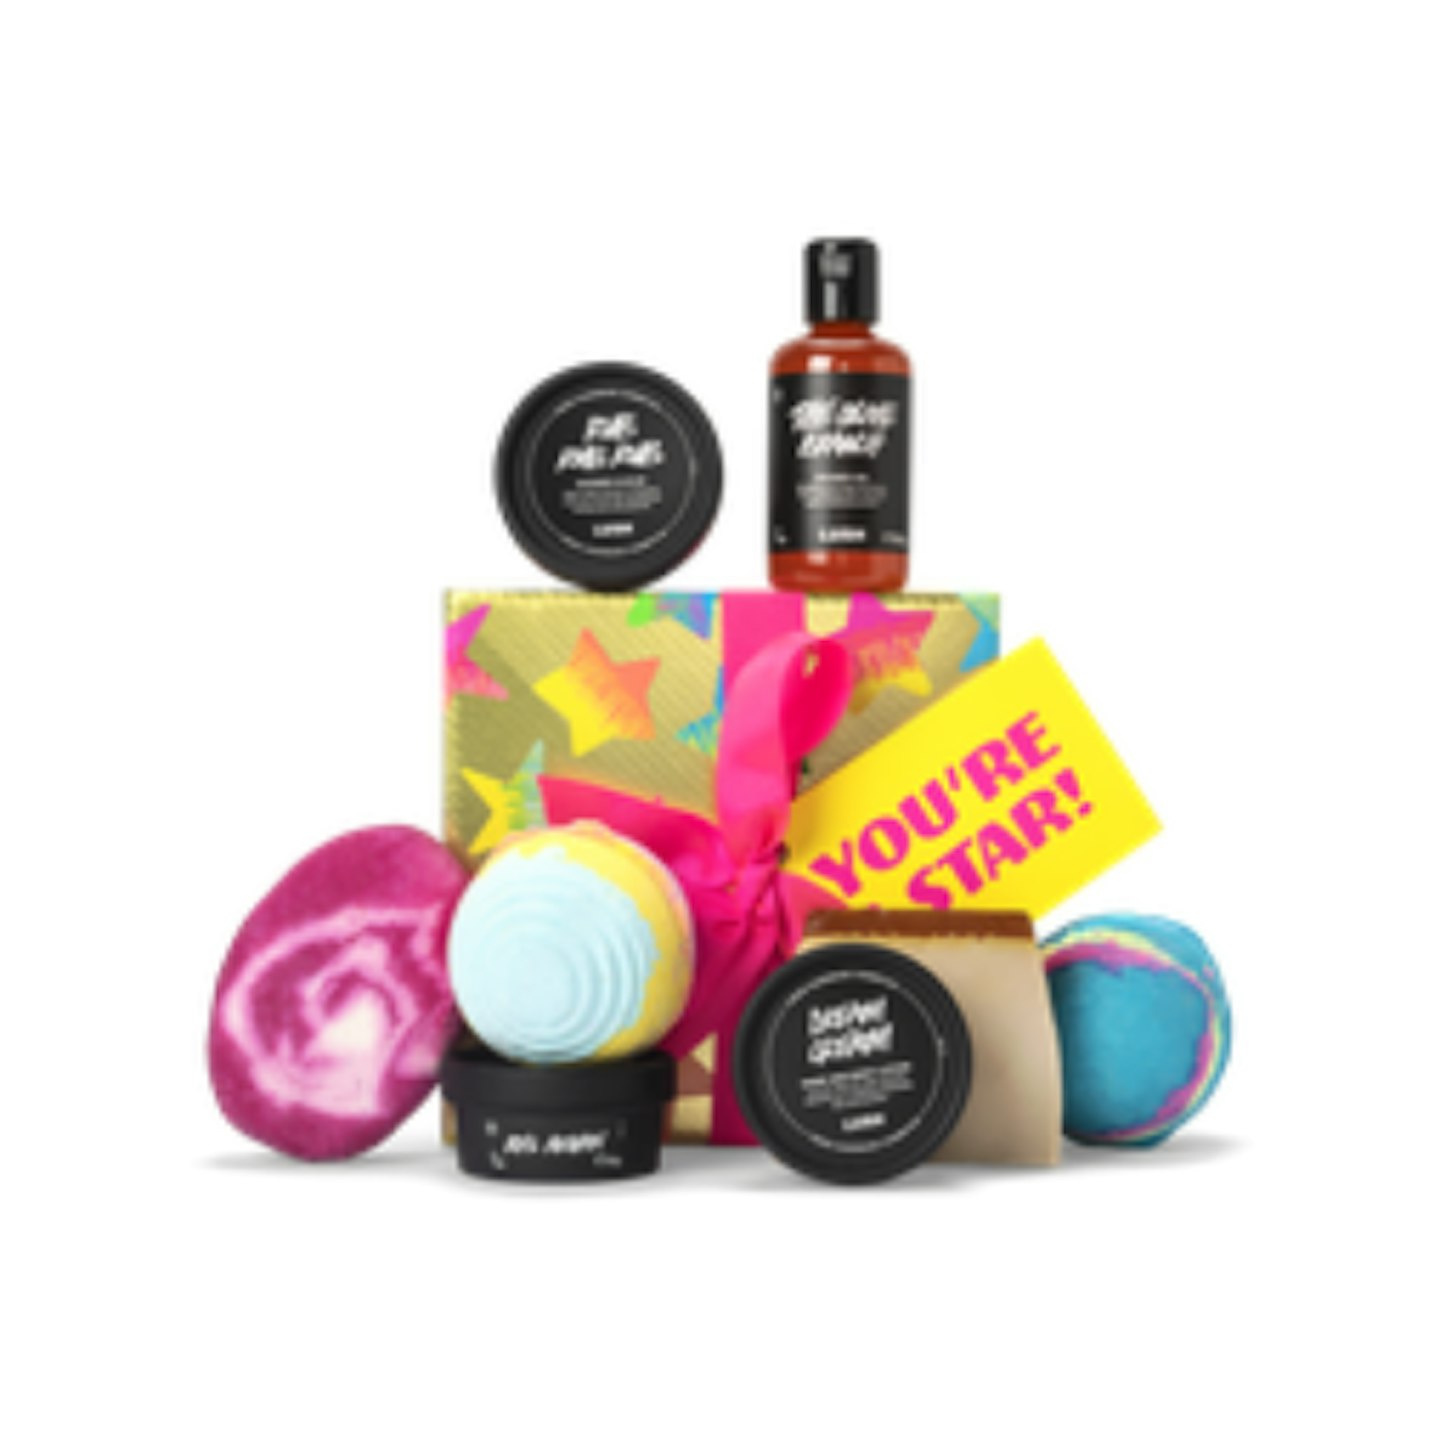 Lush 'You're a Star!' Gift